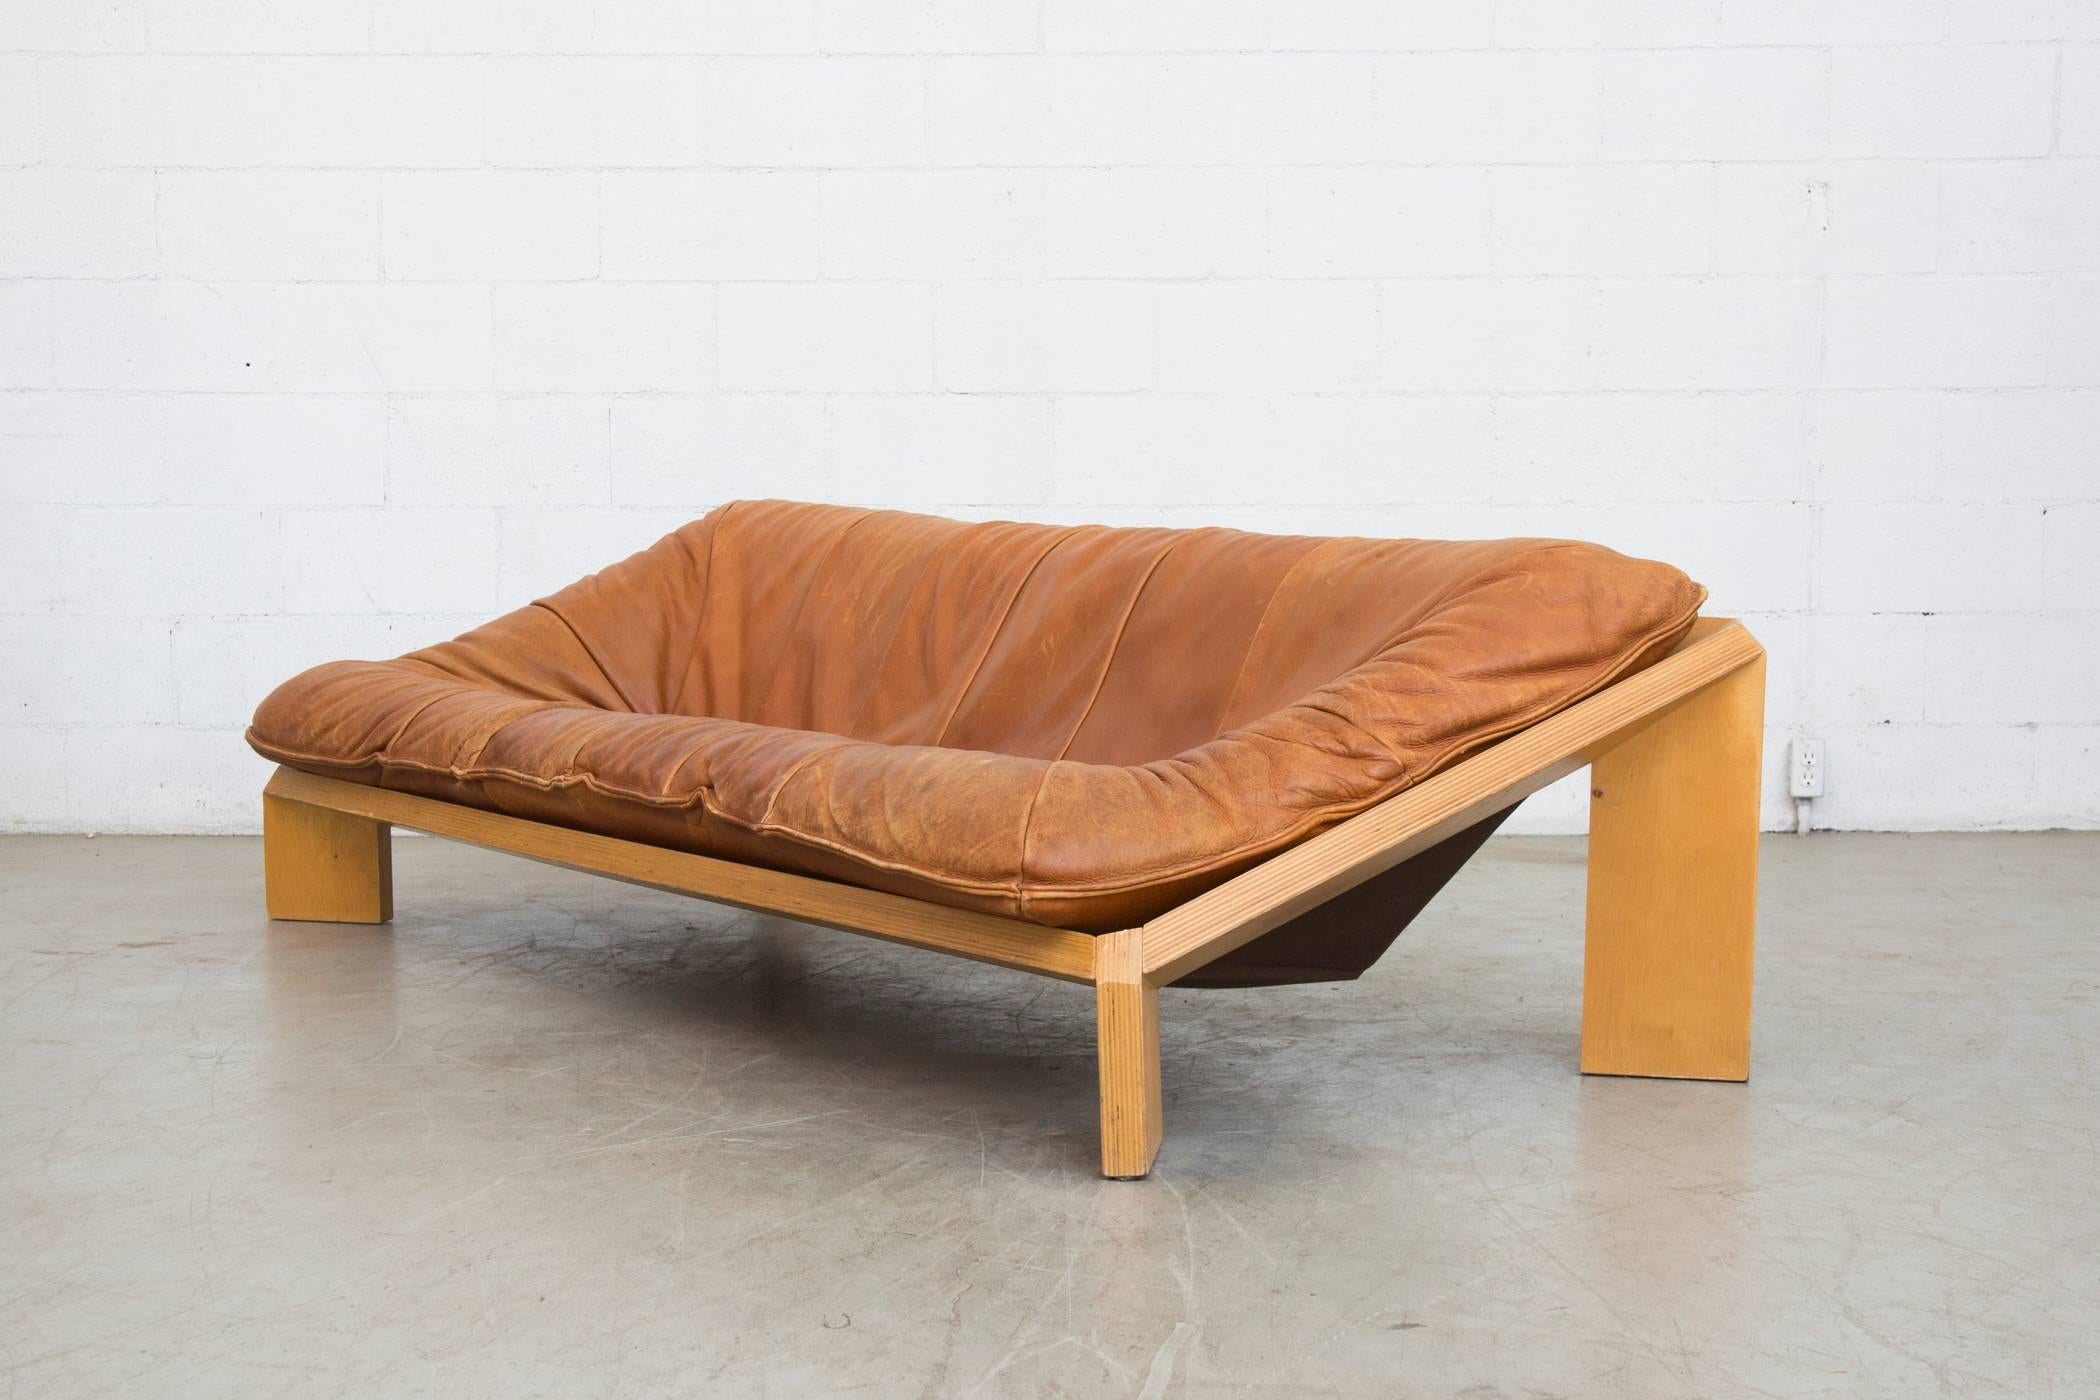 Rare three-seat iconic blocky birch plywood framed sofa with large buffalo leather seat cushion. The leather is incredibly thick and cognac in color with visible wear and patina, some scratching visible to seating and frame. In good original